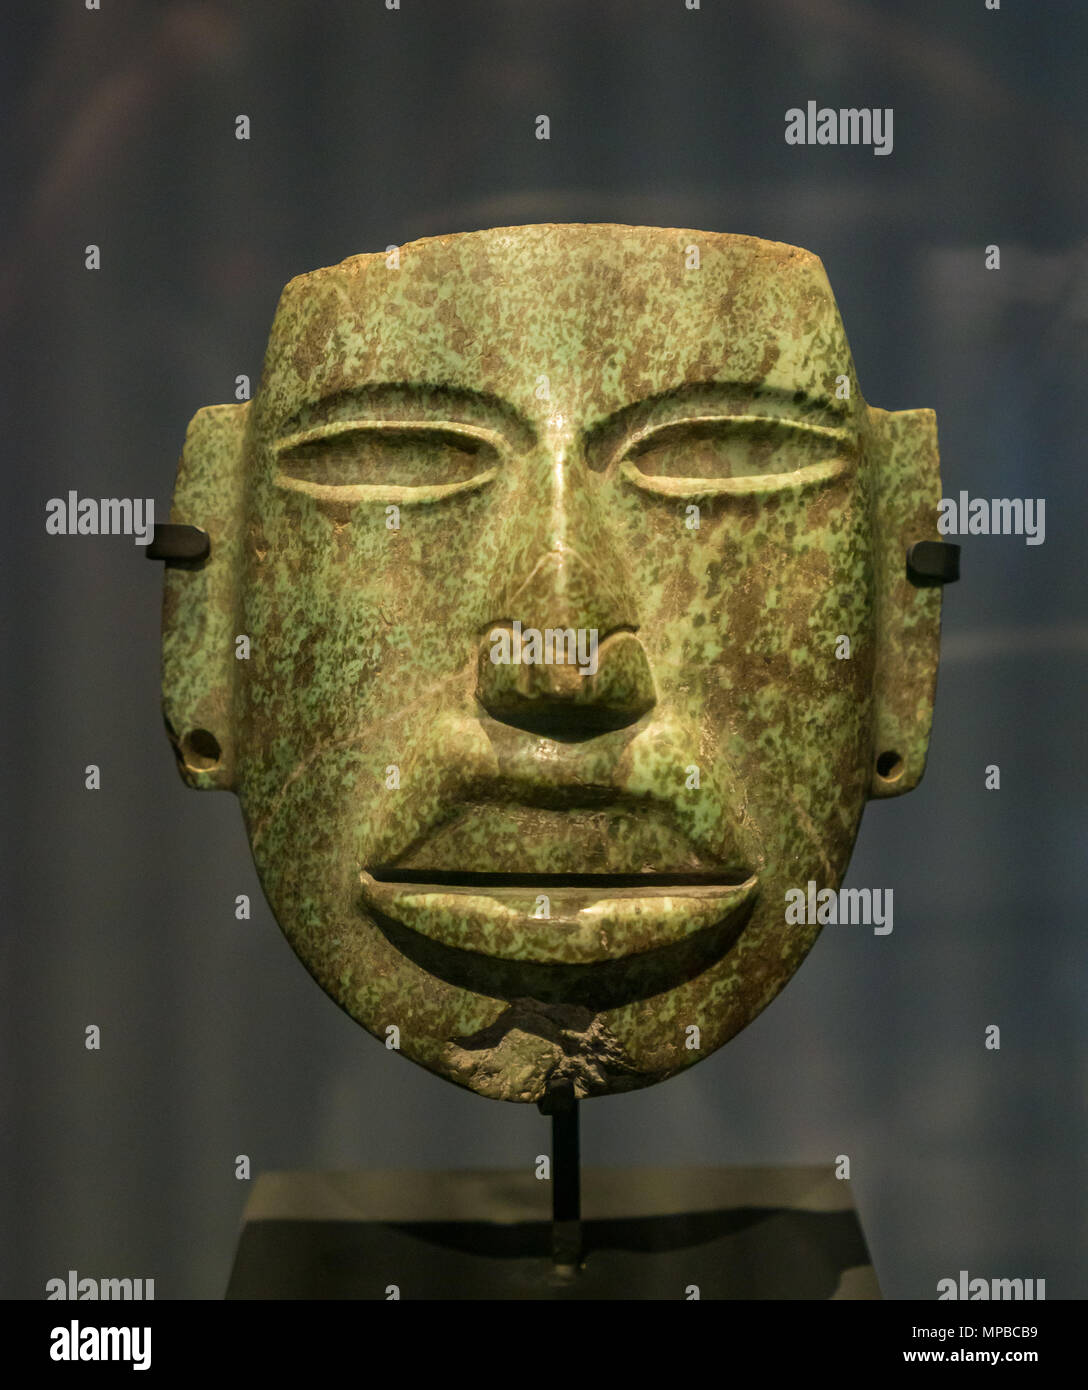 Exhibit in Museum of Pre-Columbian Art, Santiago, Chile. A green stone carved Andean culture face mask Stock Photo